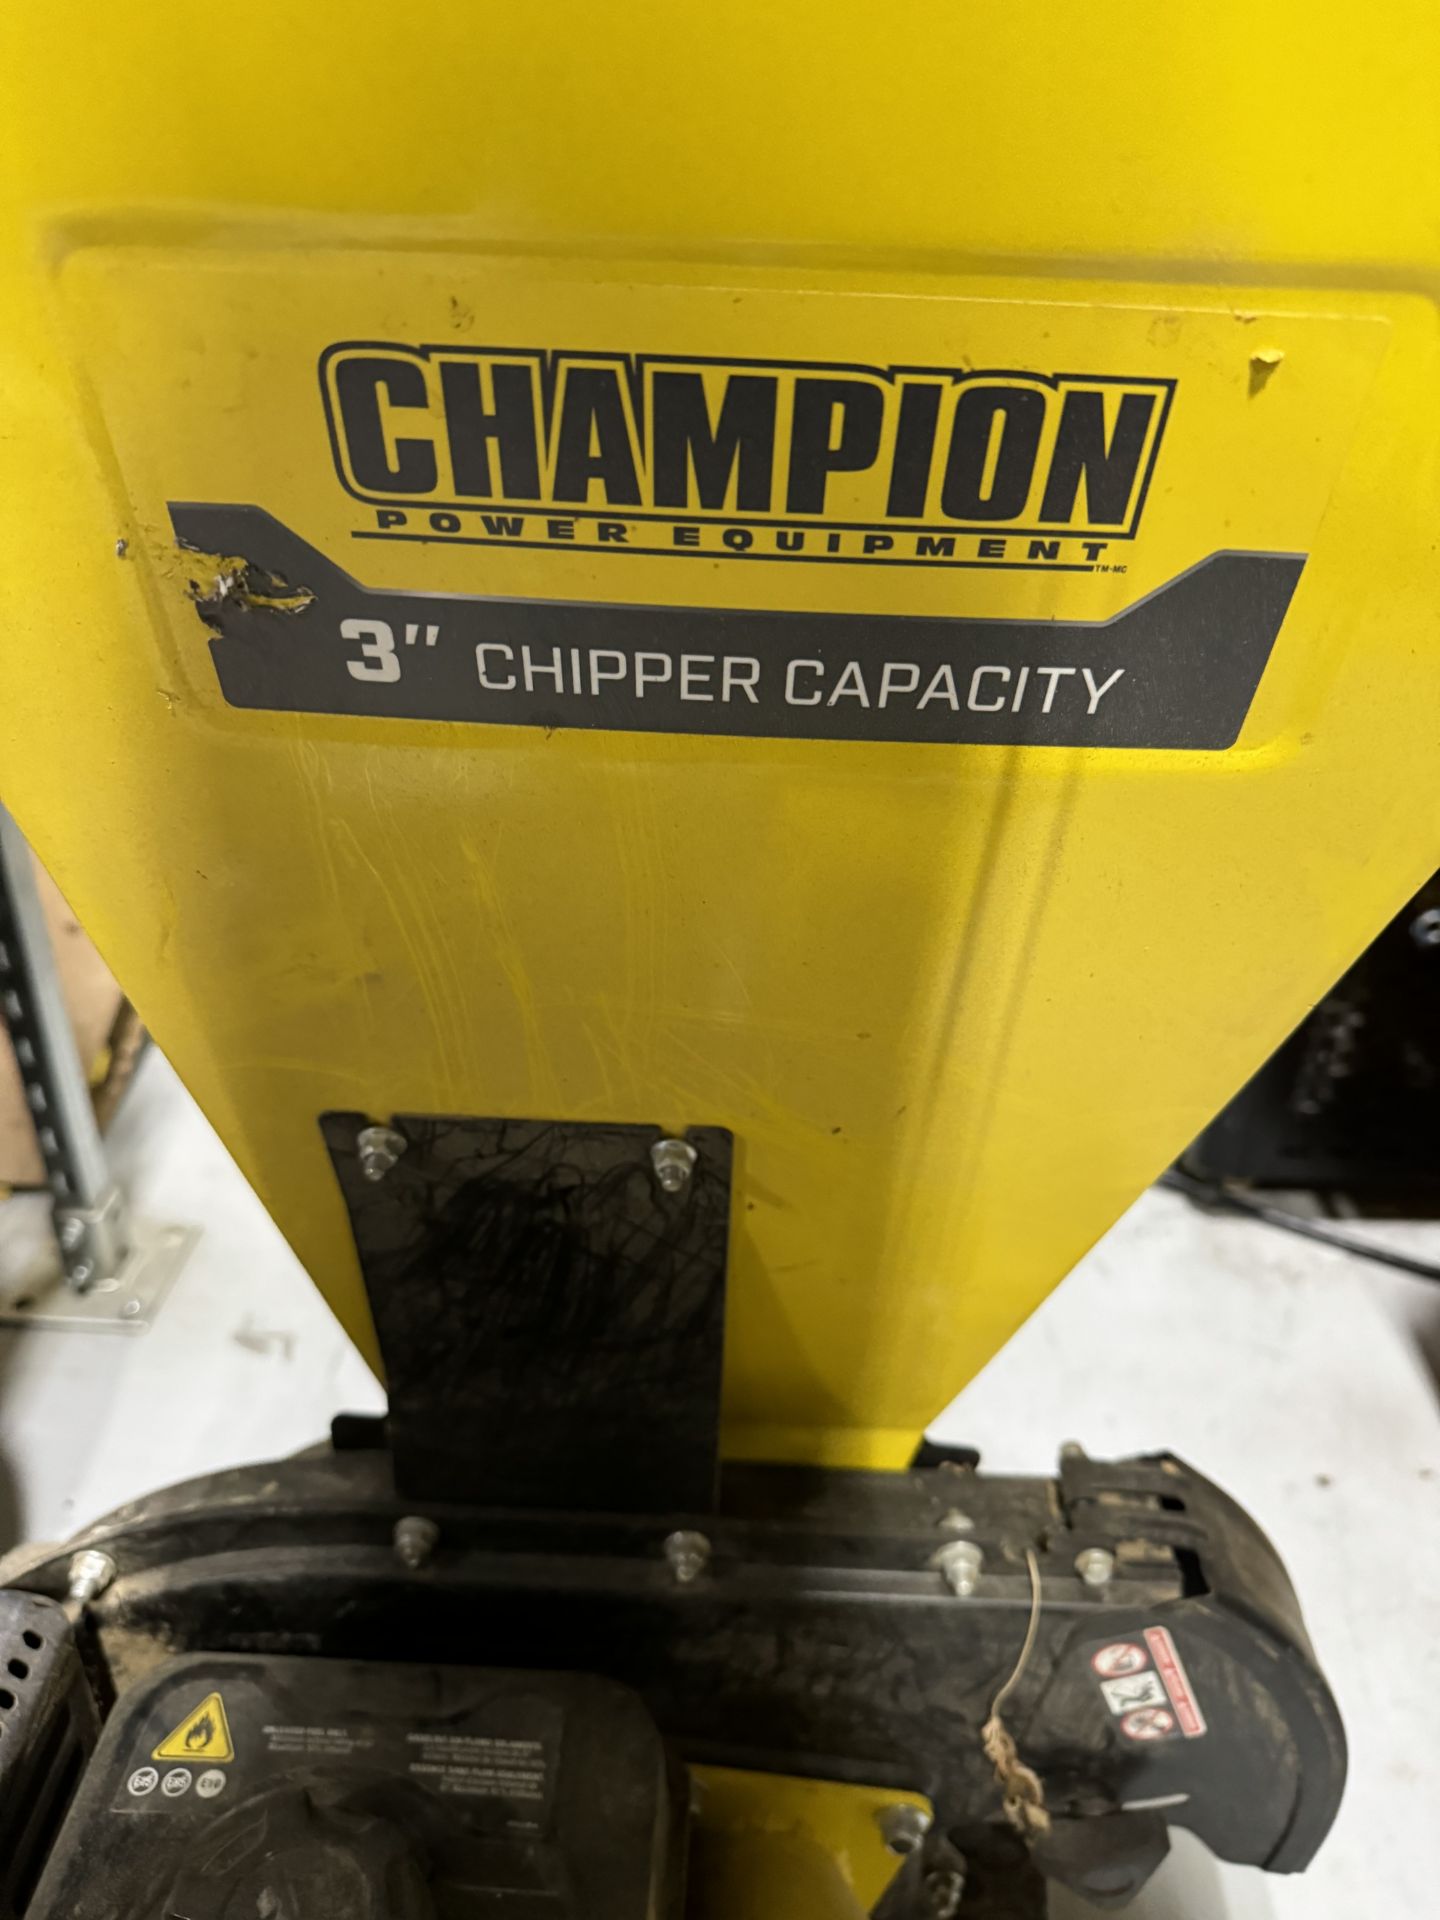 Used Champion 3" Wood Chipper. Model 200946 - Image 3 of 8